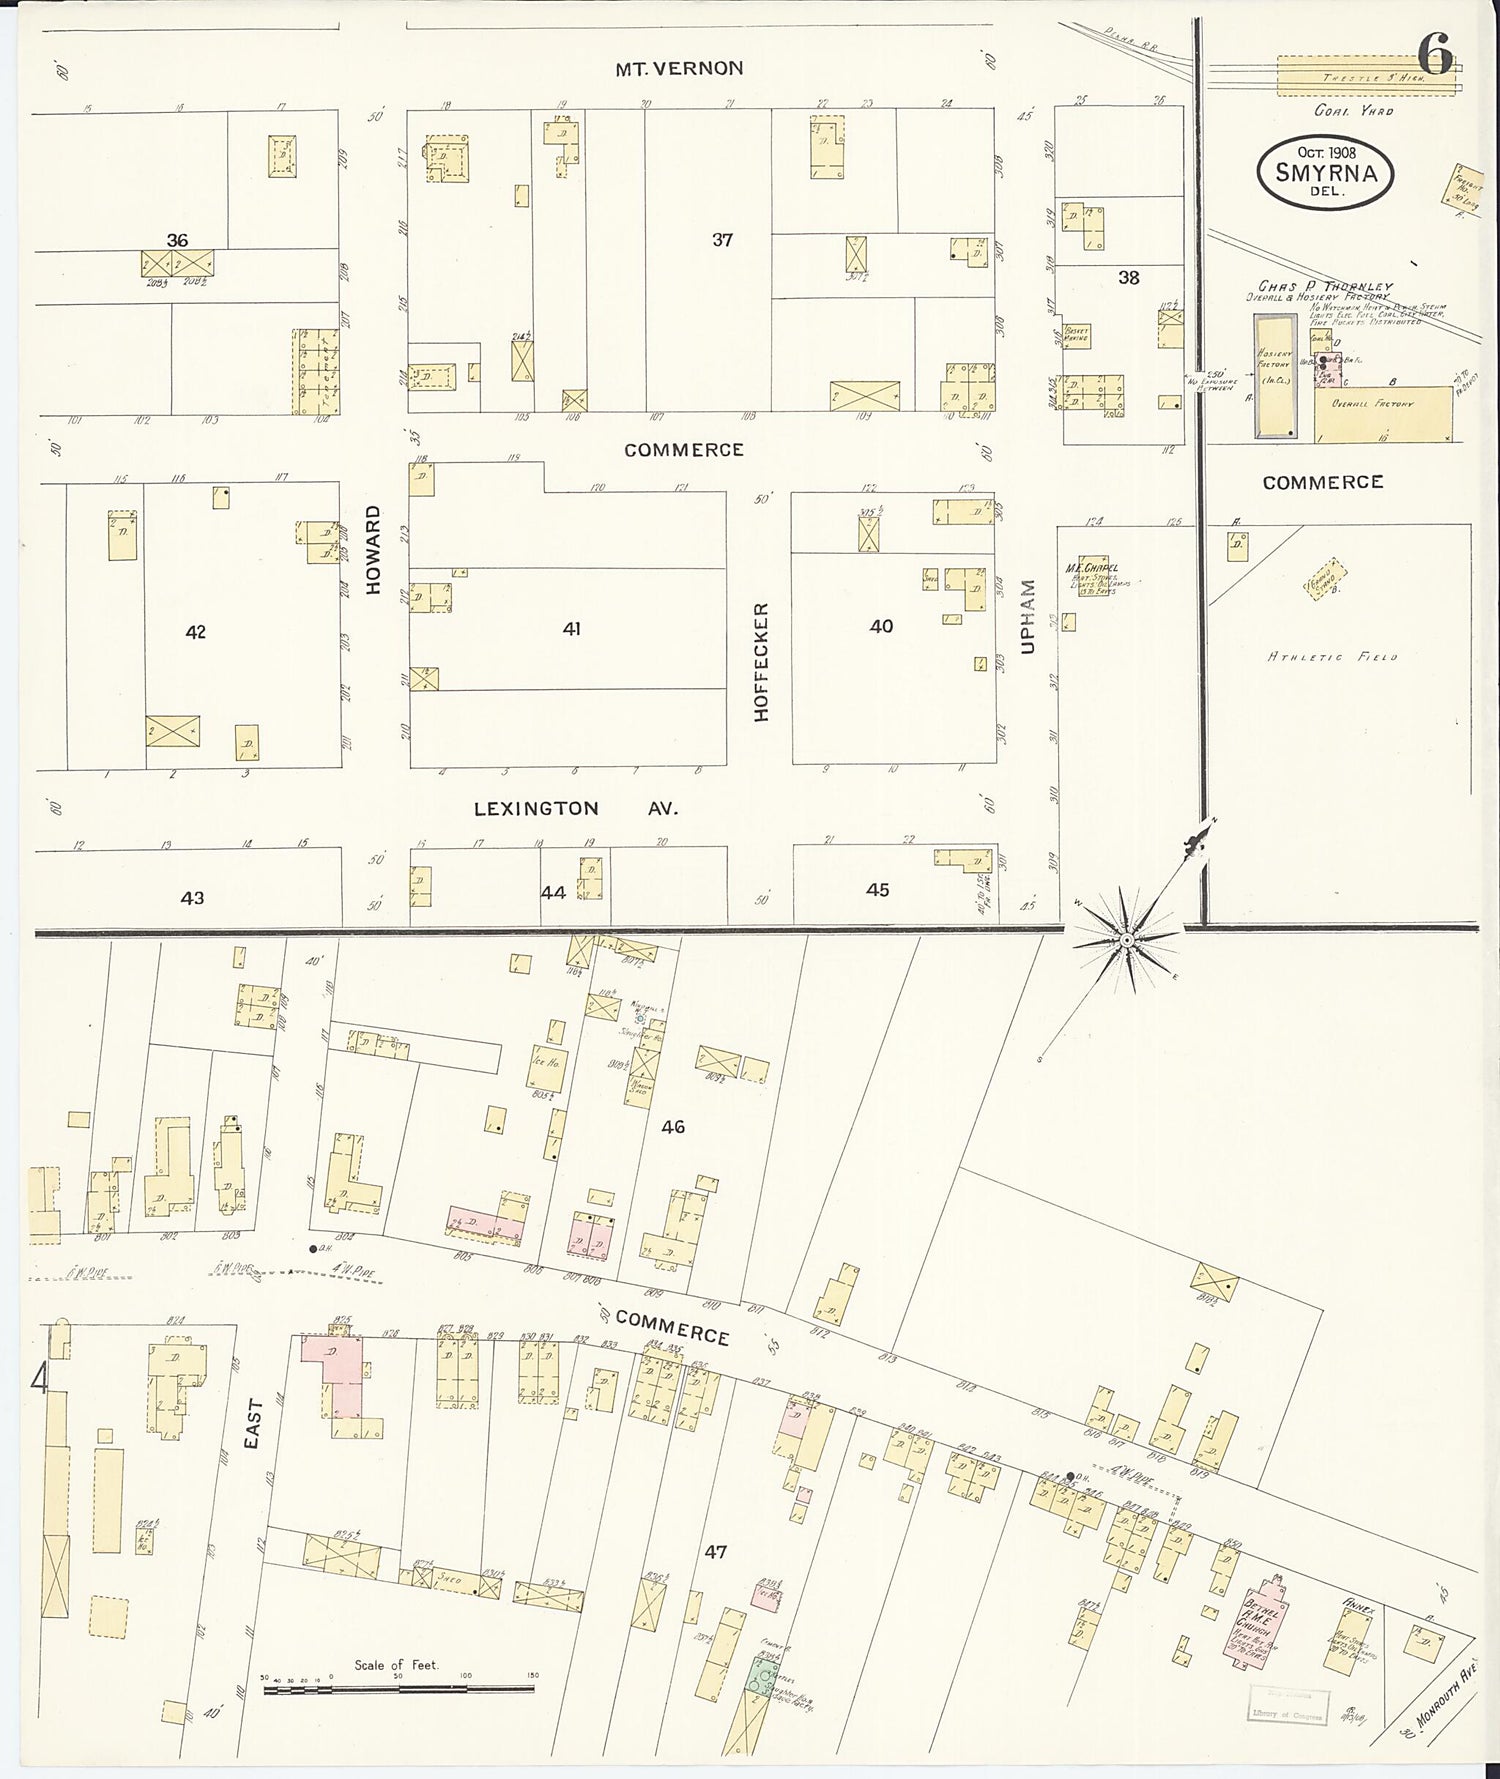 This old map of Smyrna, Kent County, Delaware was created by Sanborn Map Company in 1908